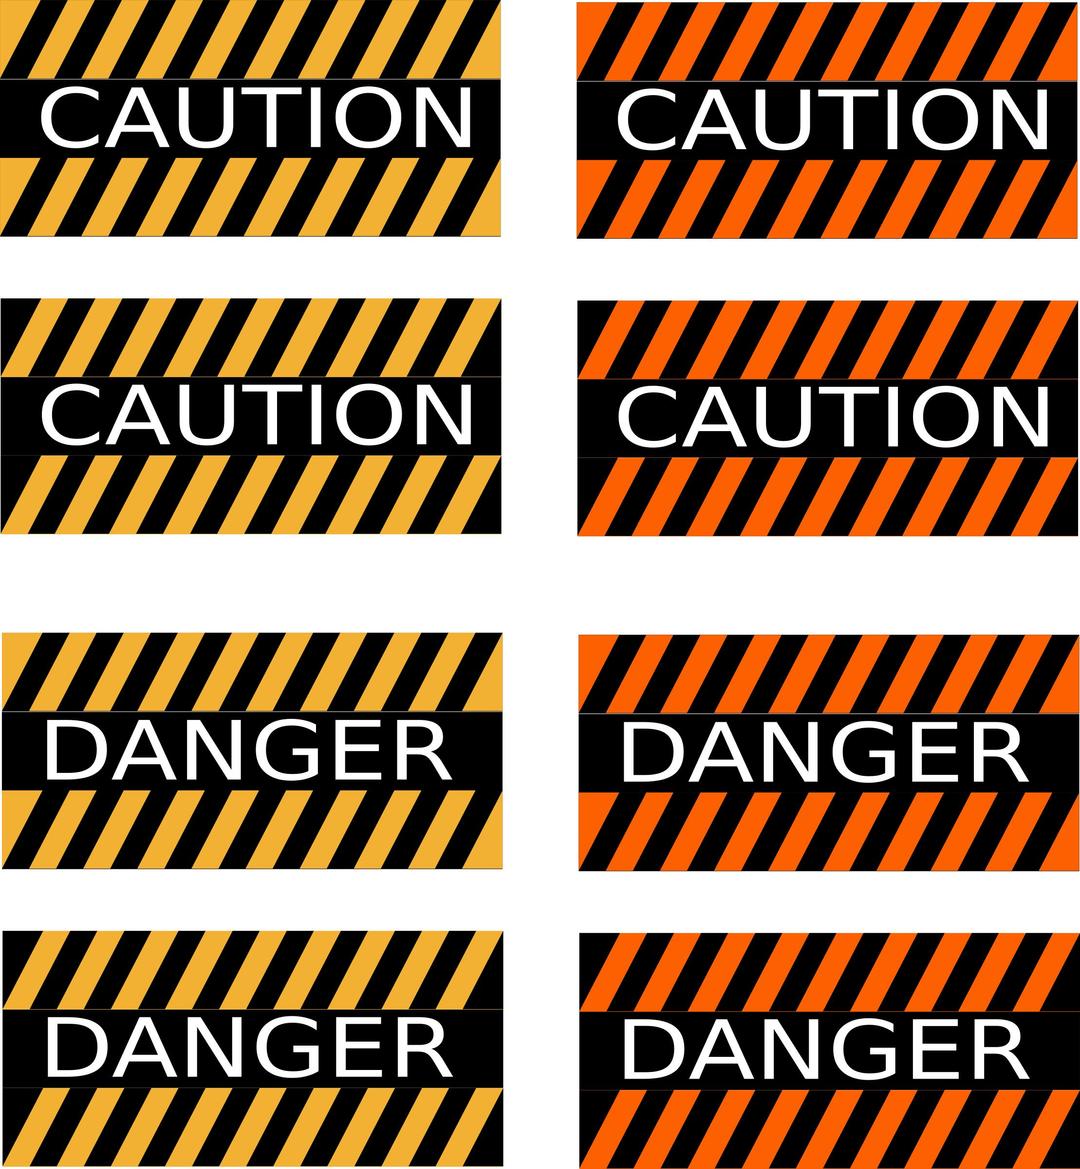 Caution and Danger Signs png transparent